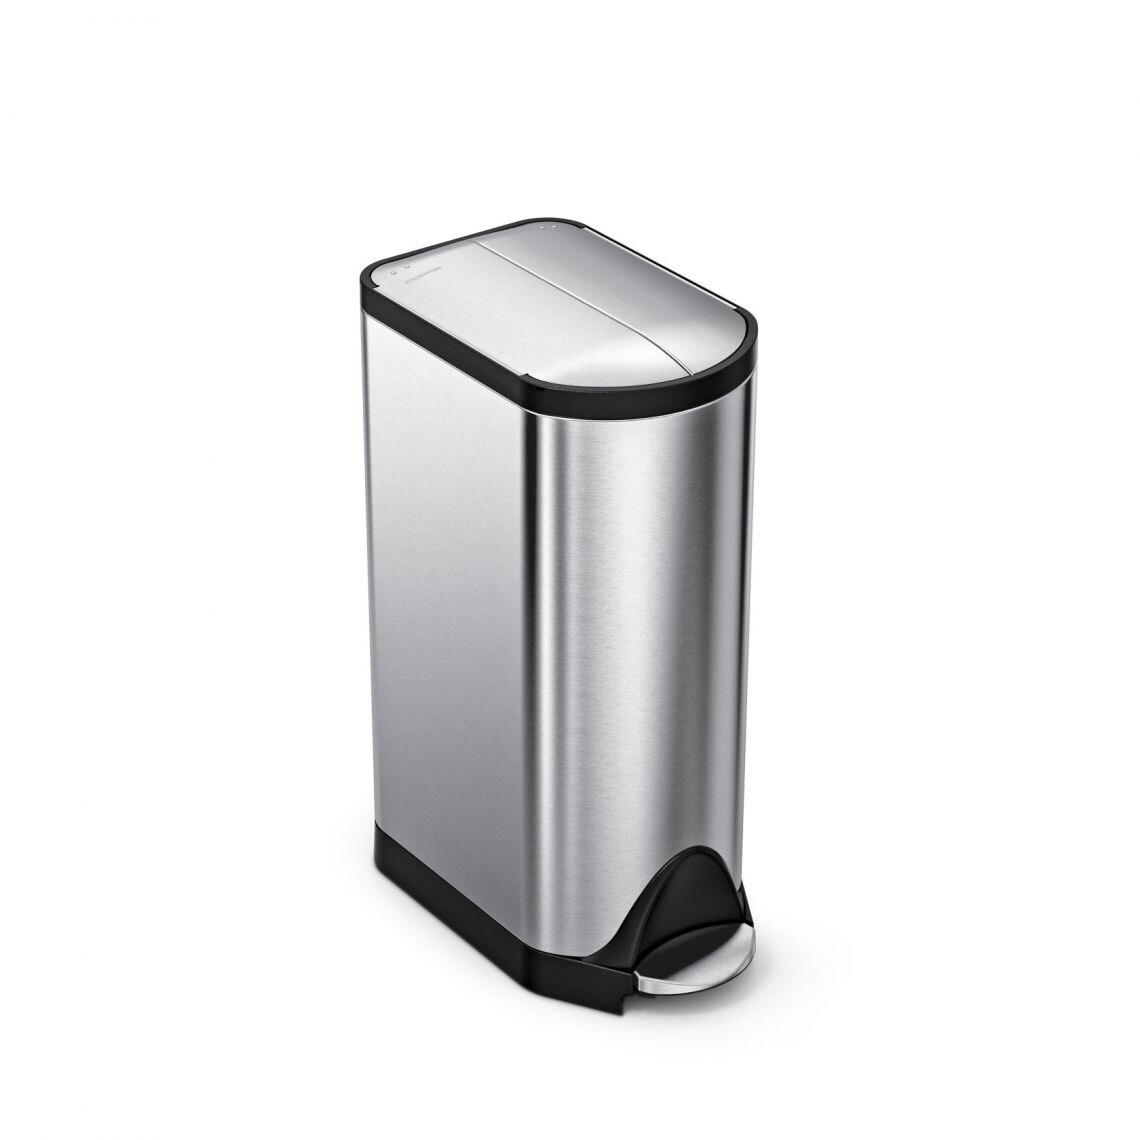 simplehuman's premium 21.1-Gal. Stainless Steel Trash Can is yours